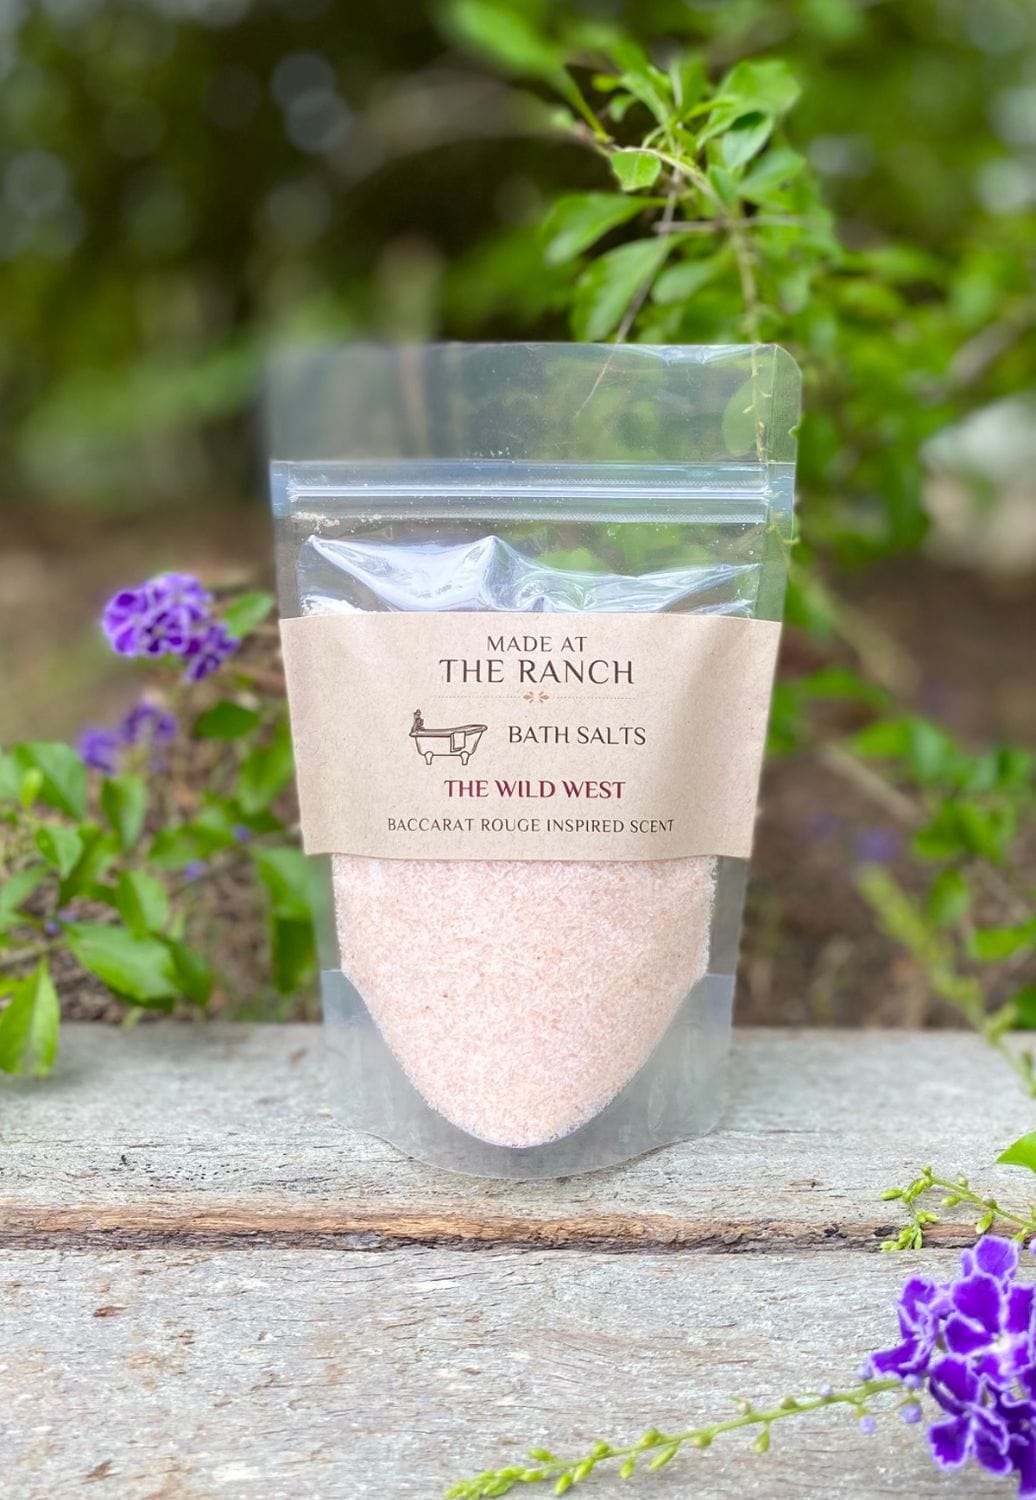 Made at The Ranch Homewares - General The Wild West Made At The Ranch The Wild West Bath Salts